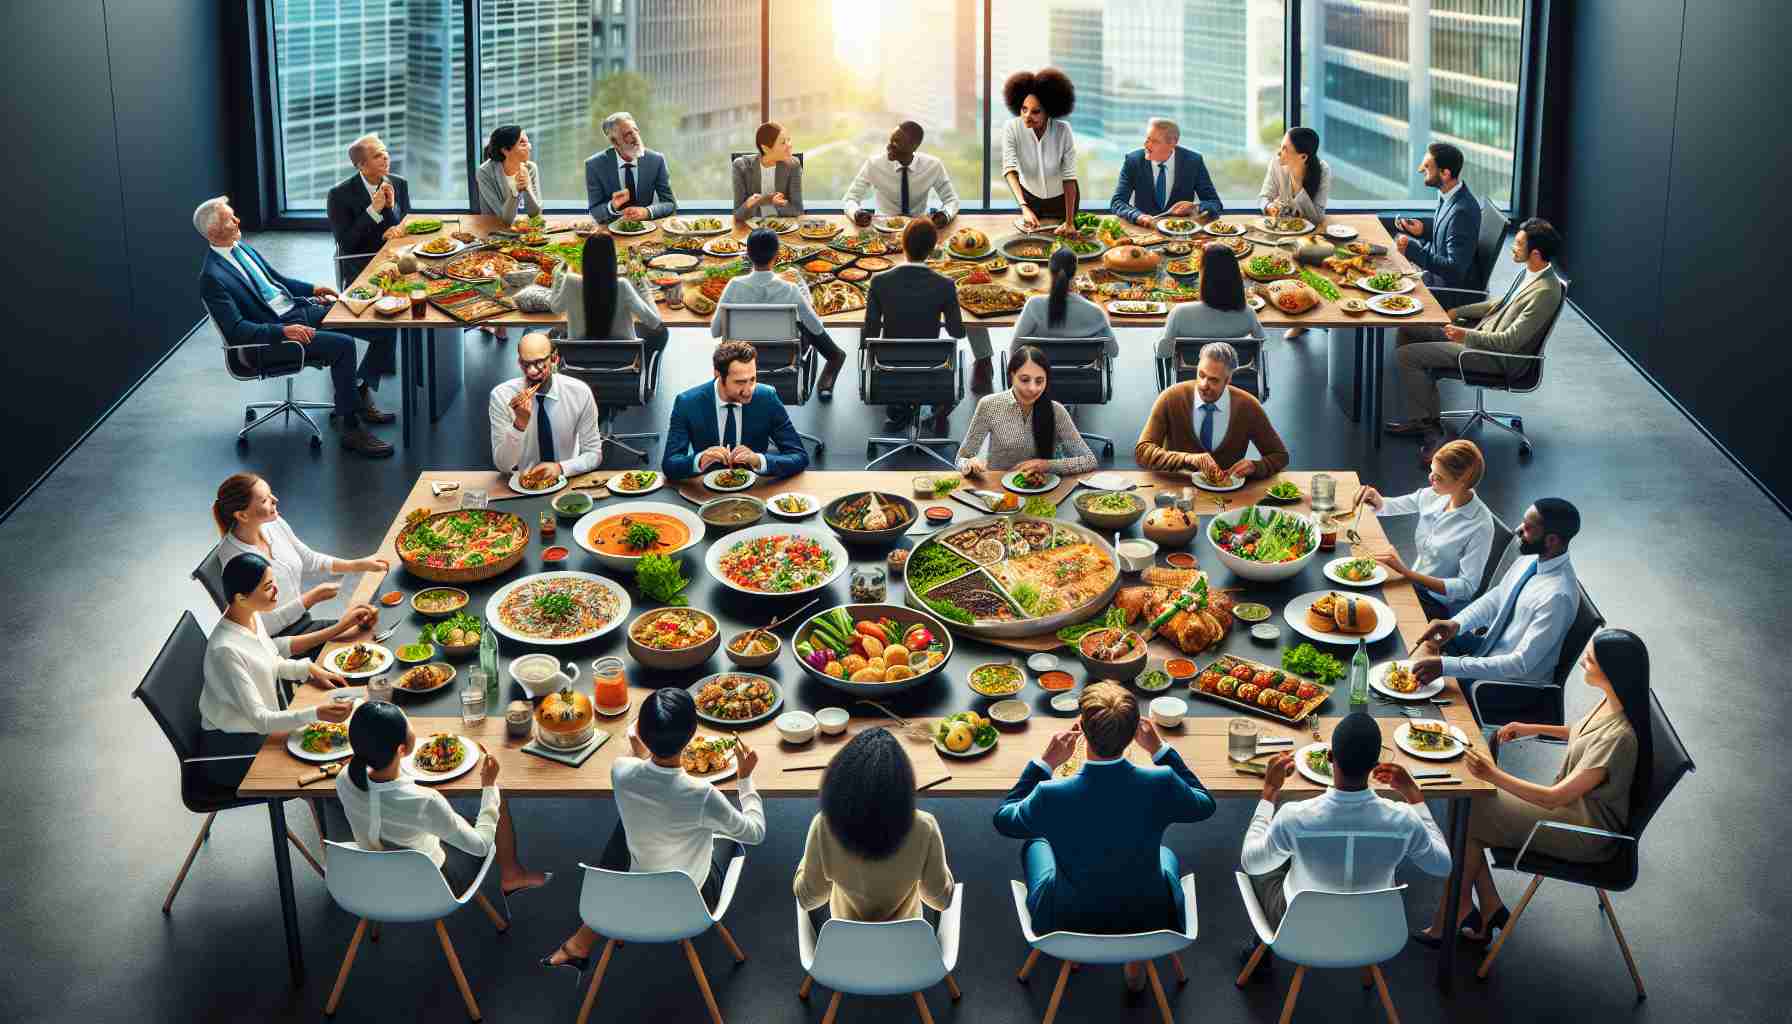 Create a high definition image capturing the essence of fusion cuisine within a corporate office setting. Interpret the scene to contain a variety of food dishes showing a blend of different culinary traditions. The office should be a modern workspace meeting room with state-of-the-art facilities. In the scene, include multiple people of diverse descents like Caucasian, Black, Hispanic, Middle-Eastern, and South Asian. The genders should also be diverse, depict both men and women enjoying the food, perhaps discussing the unique flavors and combinations. Let the environment be vibrant with excitement and curiosity about the fusion cuisine.